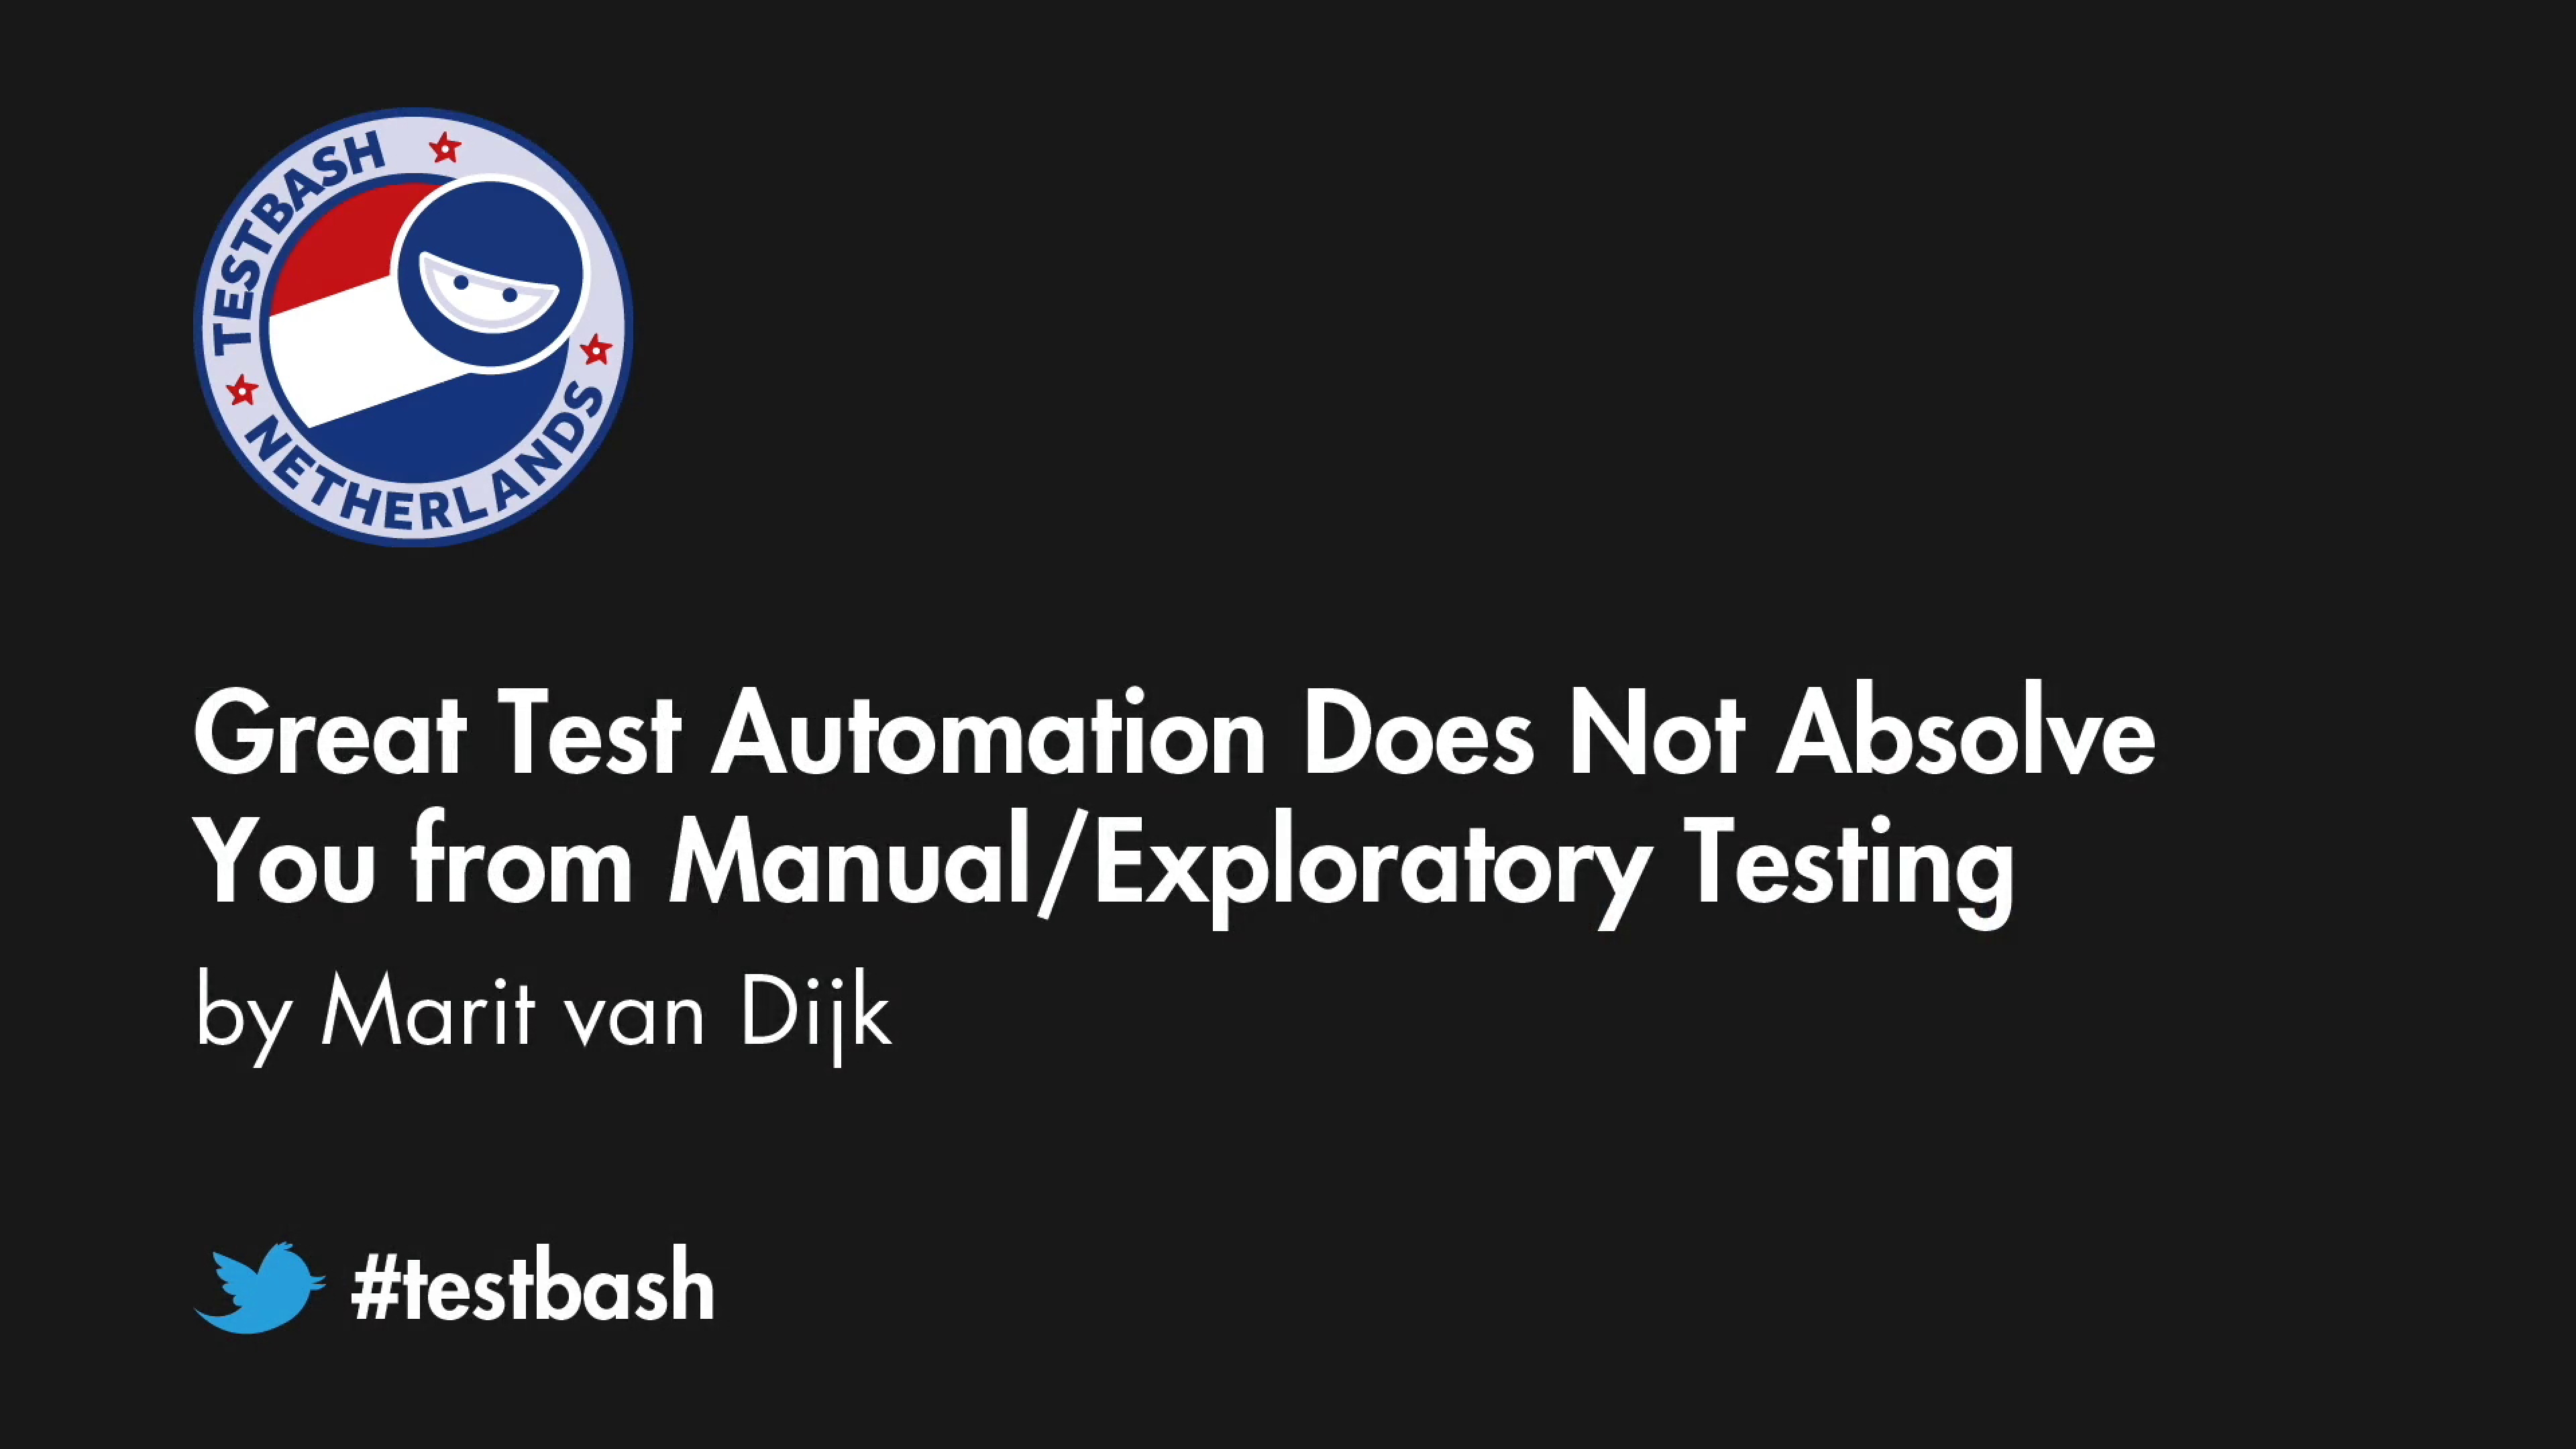 Great Test Automation Does Not Absolve You from Manual/Exploratory Testing - Marit van Dijk